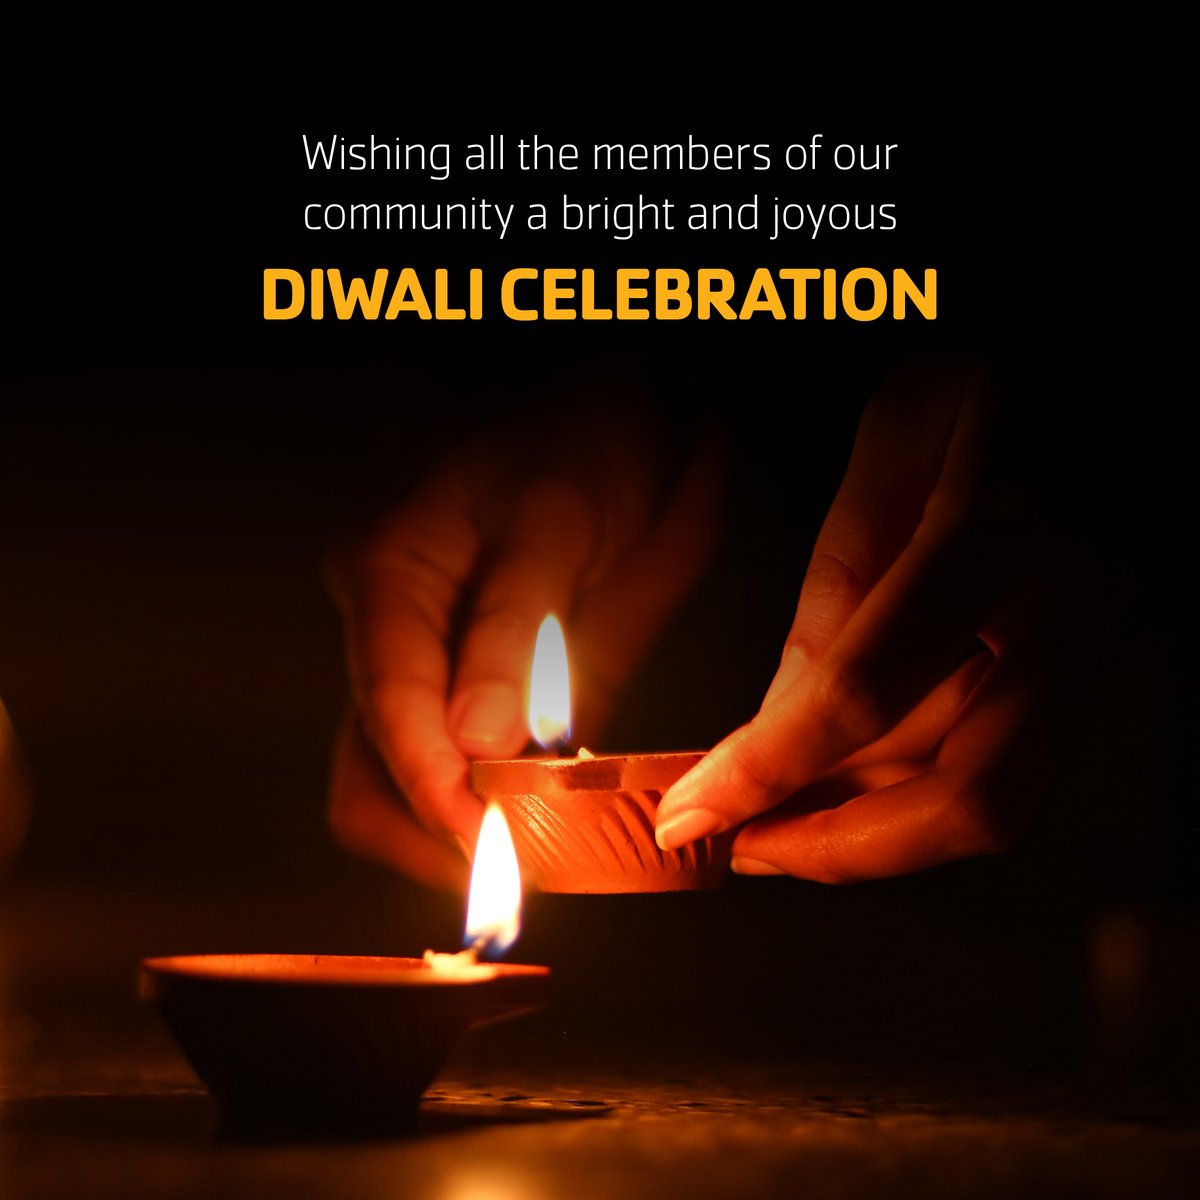 Wishing all of our Y community prosperity and light for this year. Happy Diwali from the Y!